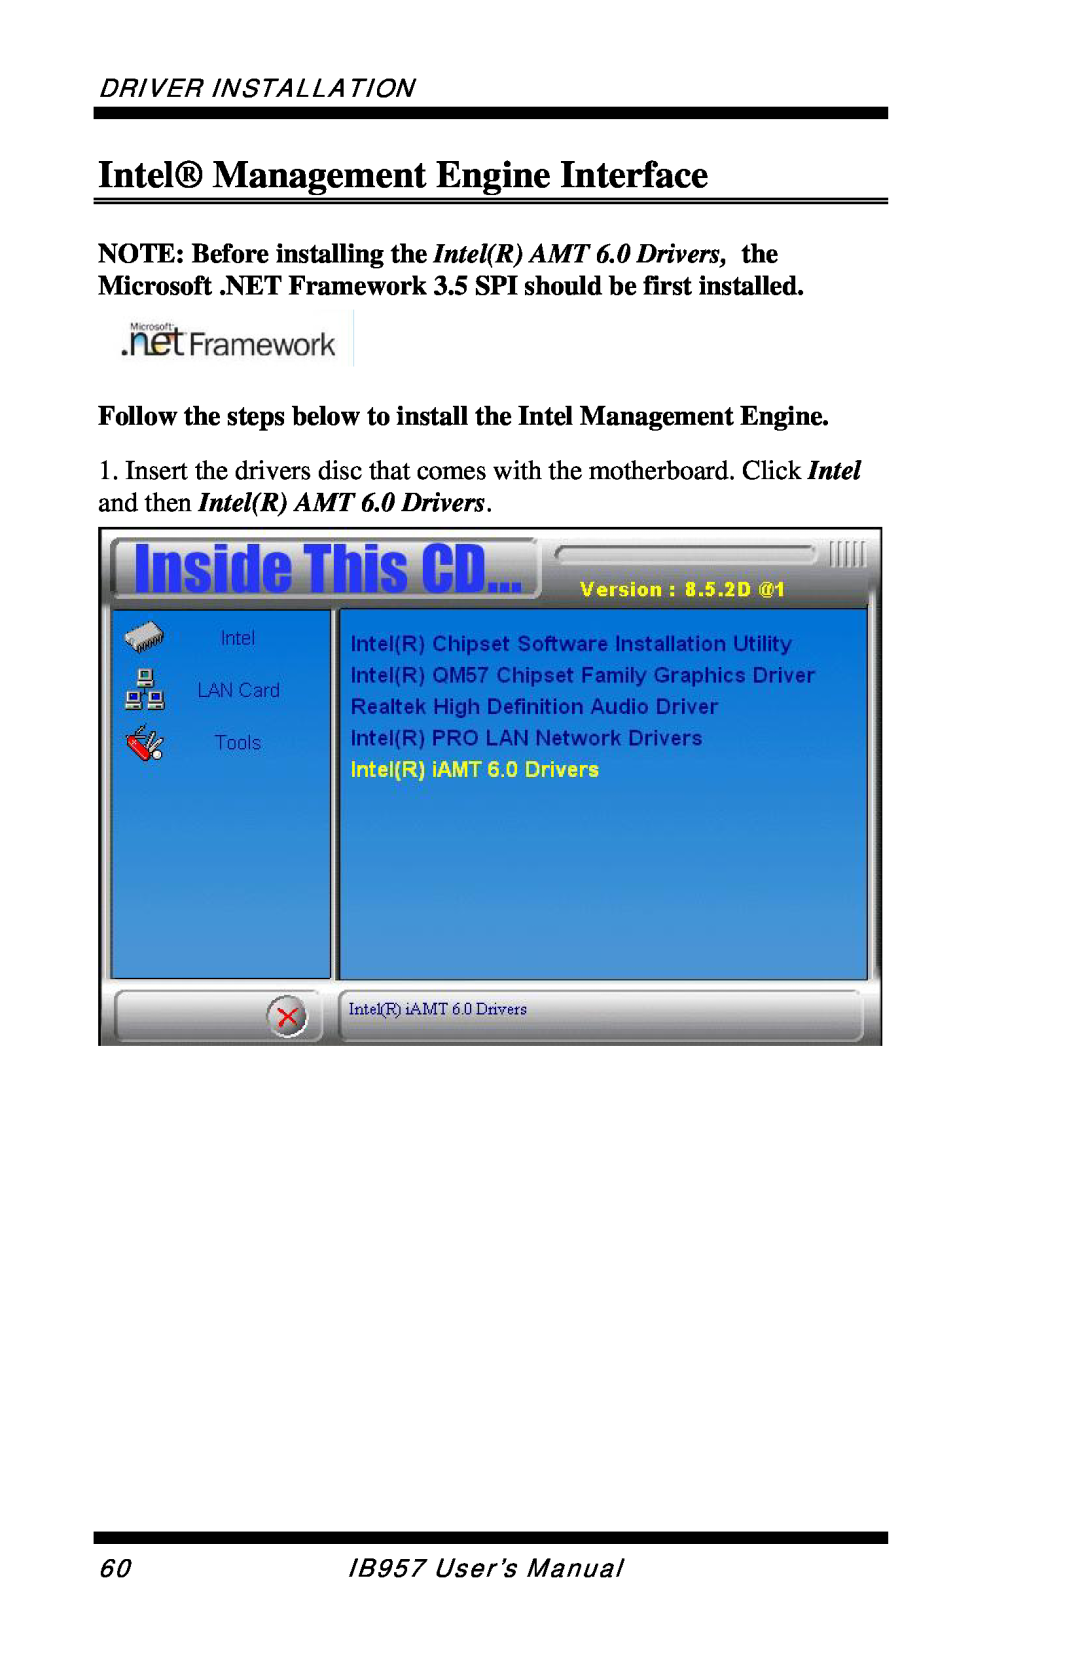 Intel IB957 user manual Intel Management Engine Interface, Follow the steps below to install the Intel Management Engine 